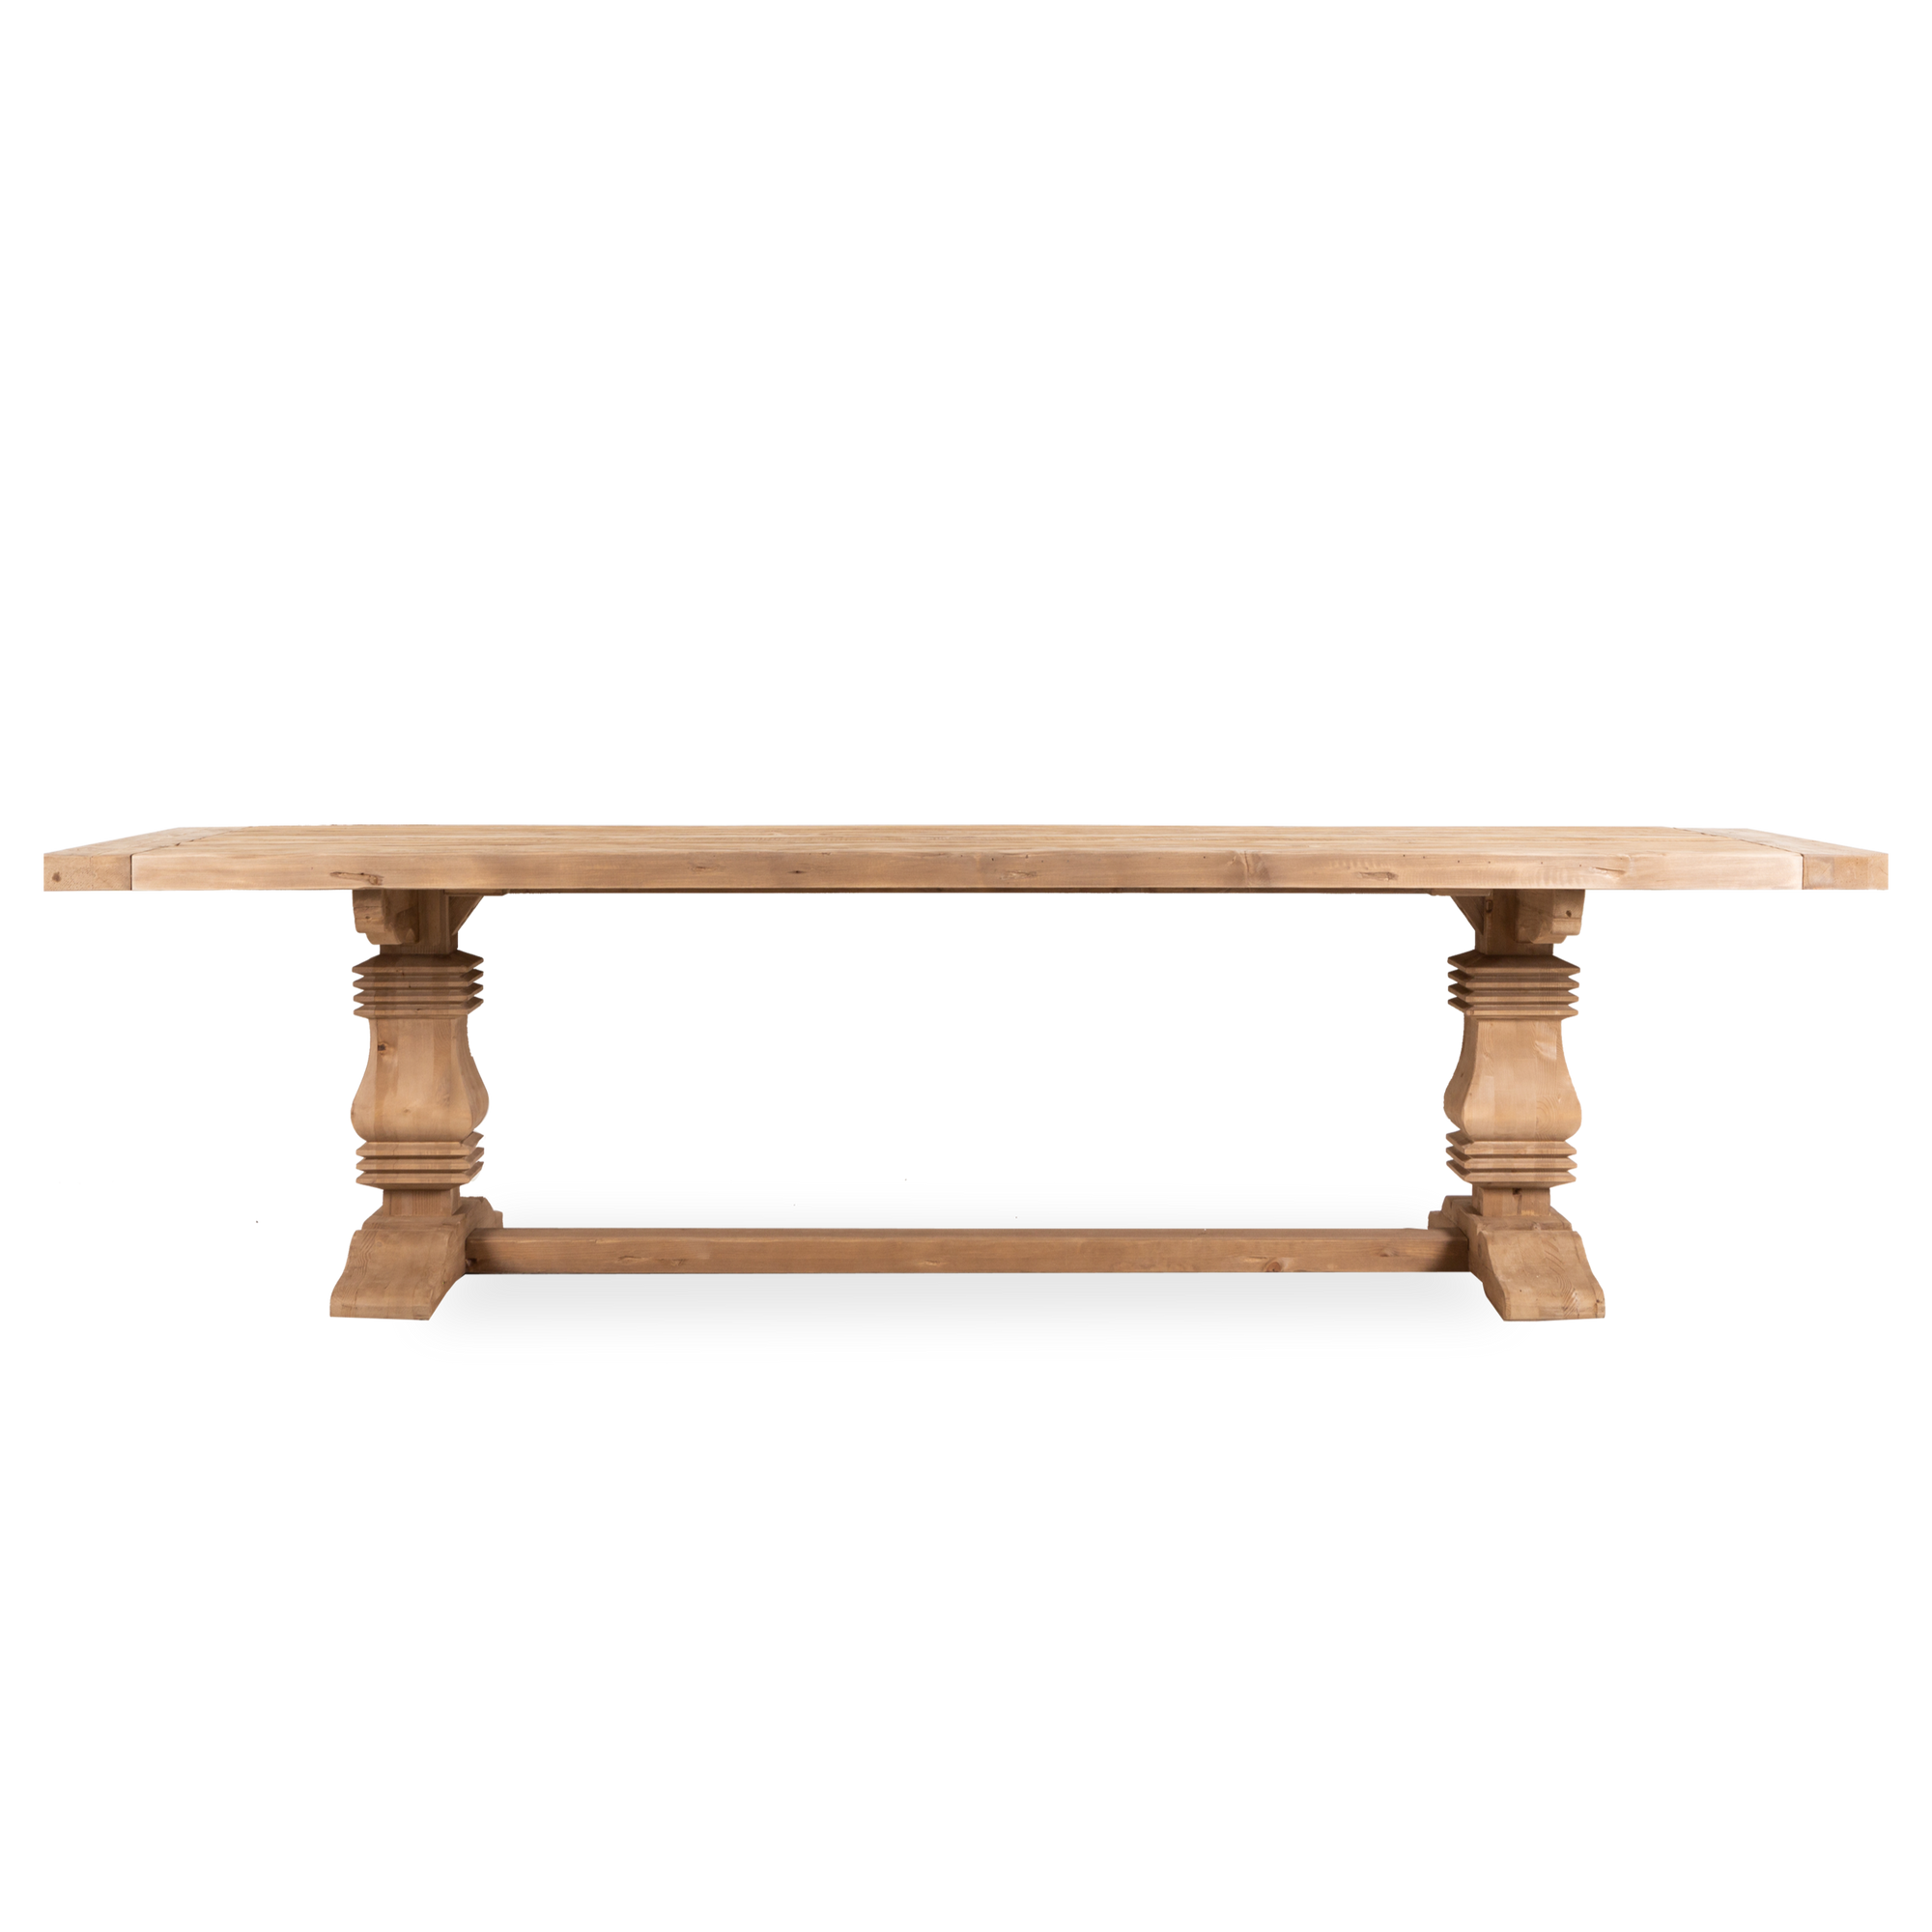 The Georgian Architectural Dining Table is handcrafted from genuine English reclaimed timber sourced from disused buildings in the UK, sometimes up to 100 years old.